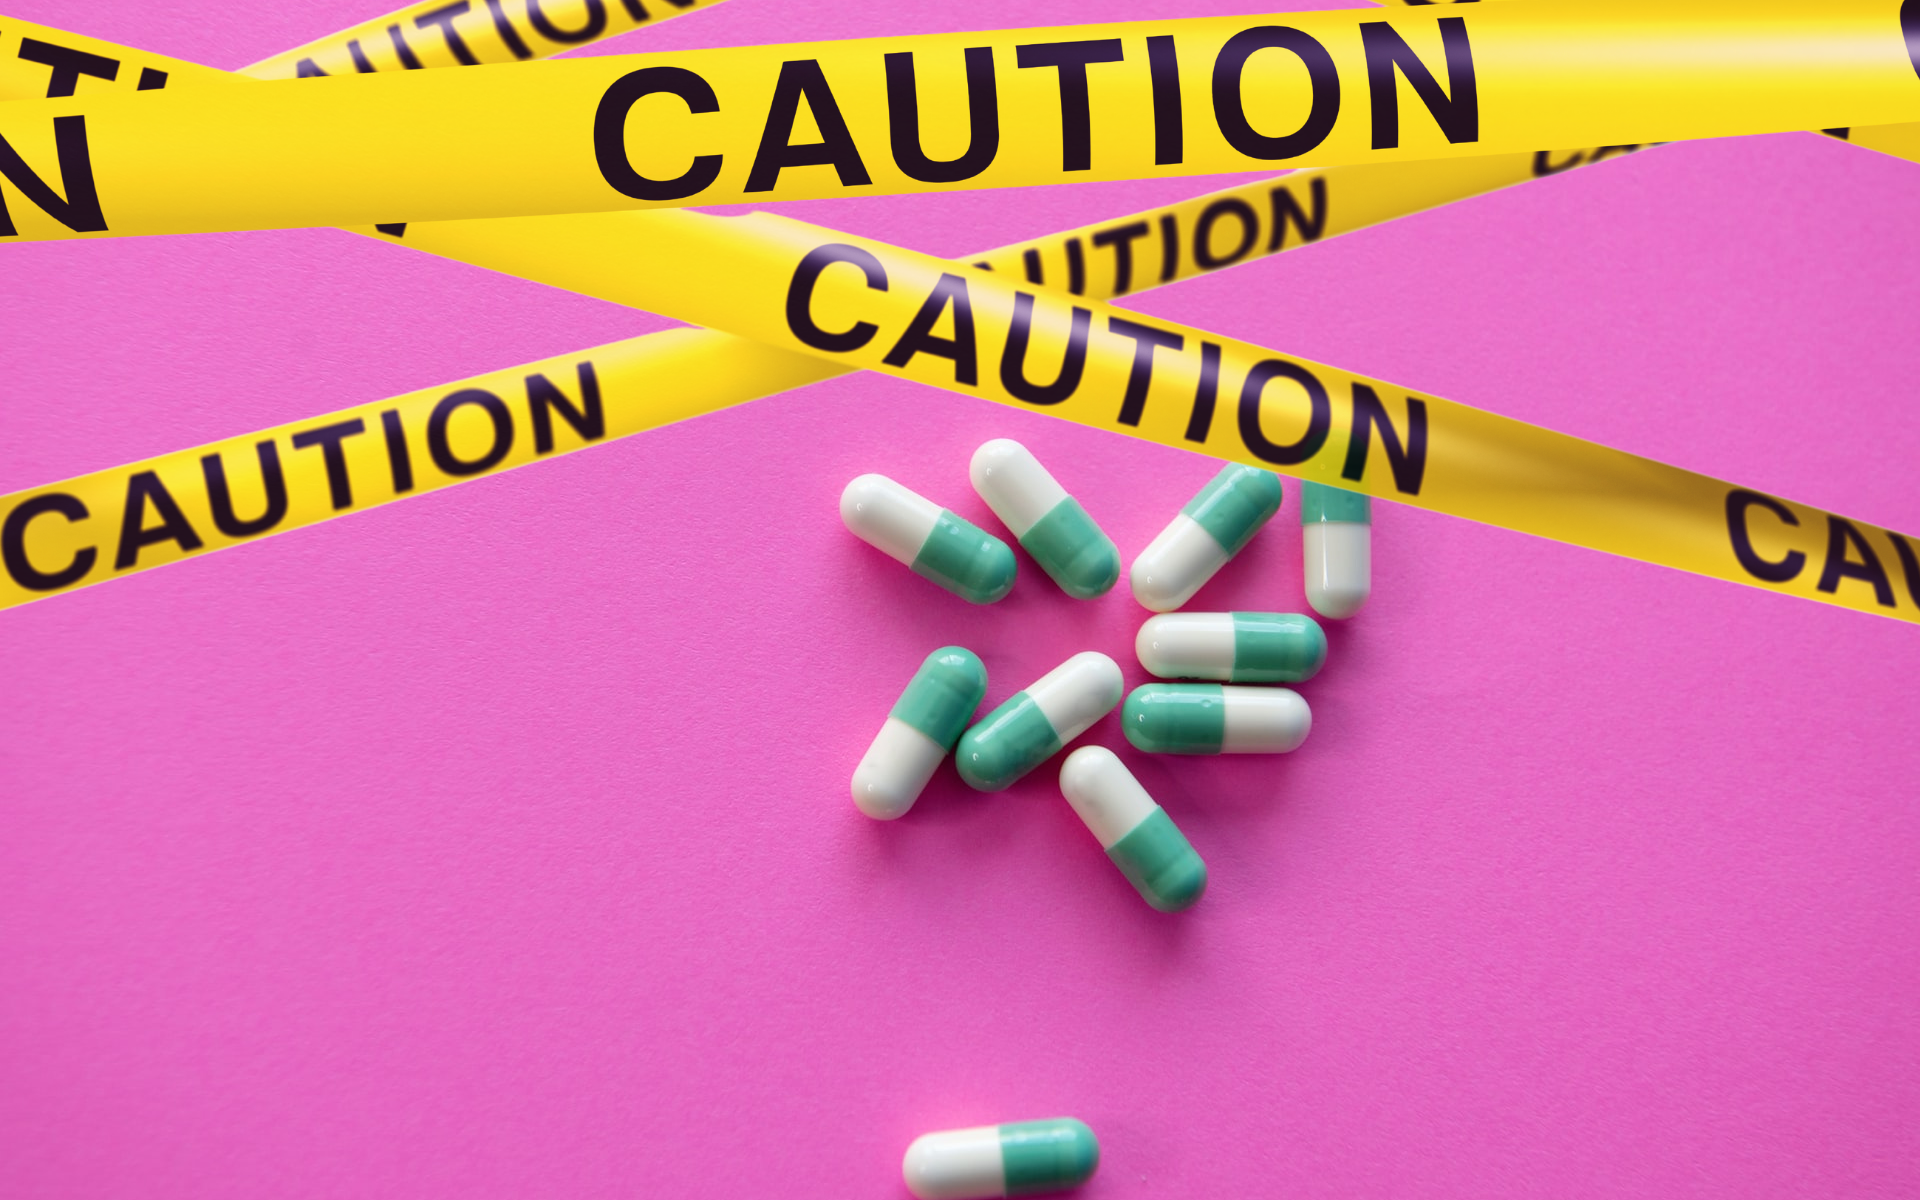 Pills sitting on pink counter surrounded by caution tape.